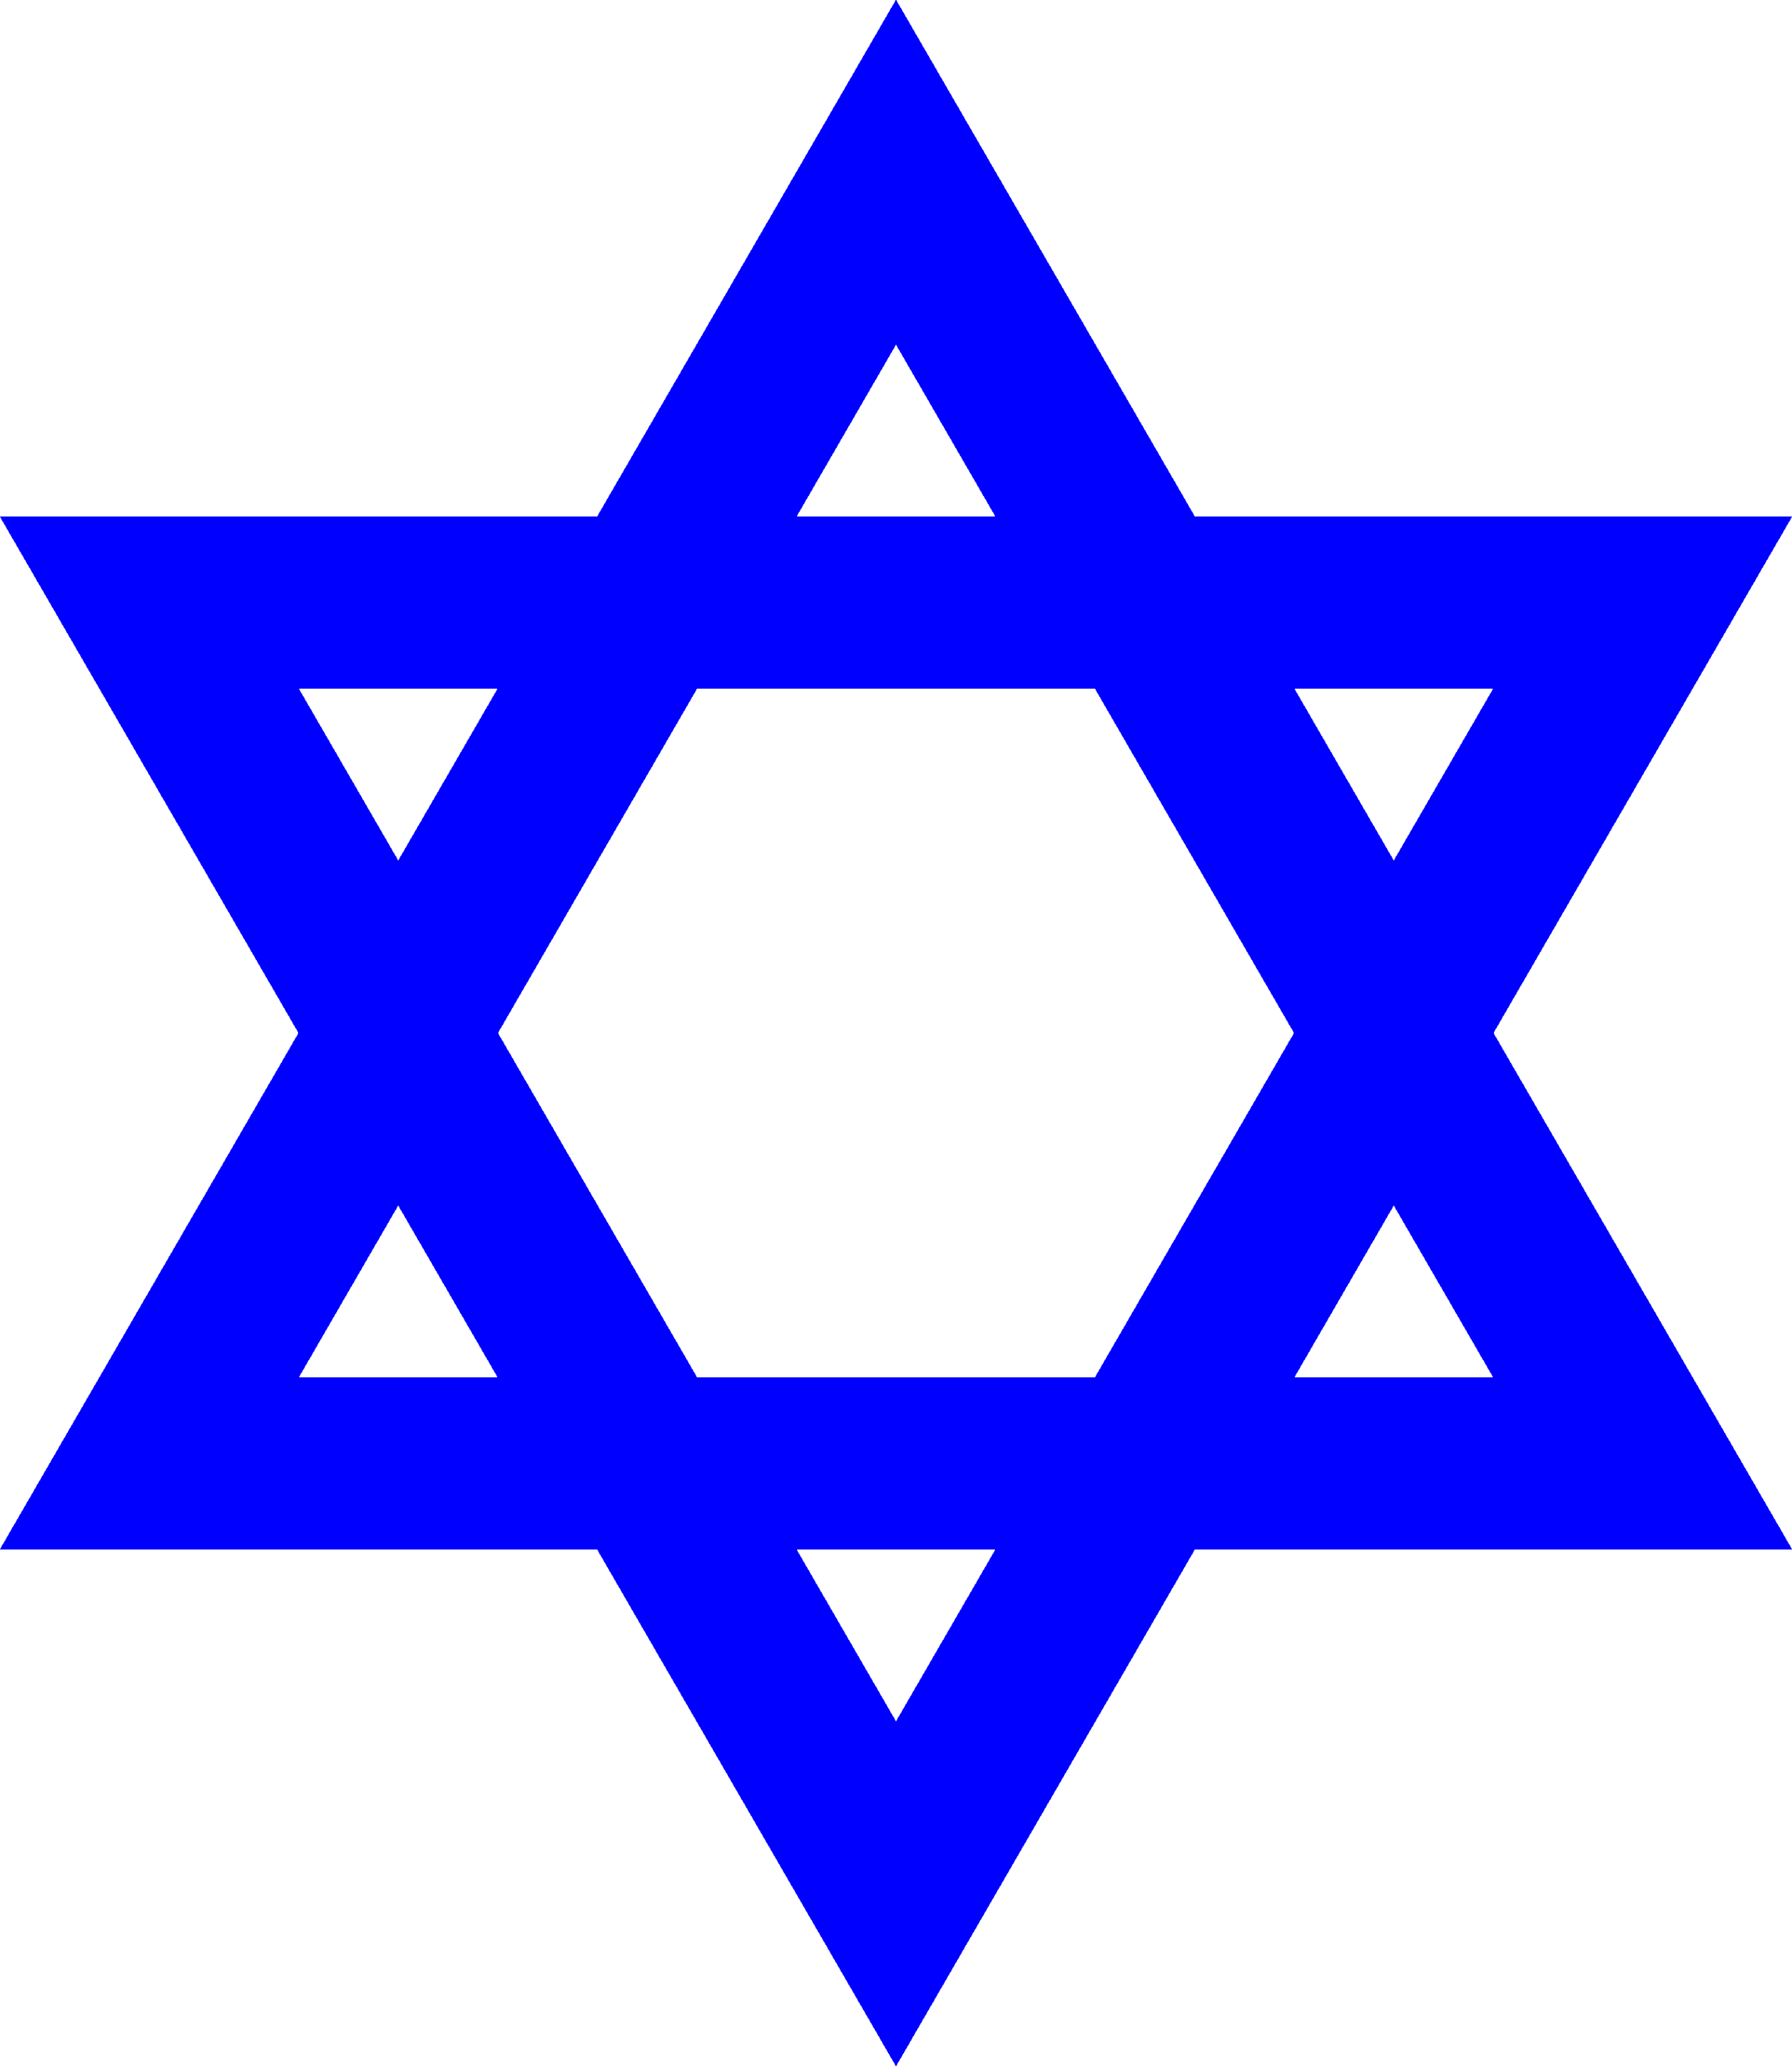 Image Wikipedia Blue Star Of David 1 Png Fantendo The Clipart ...